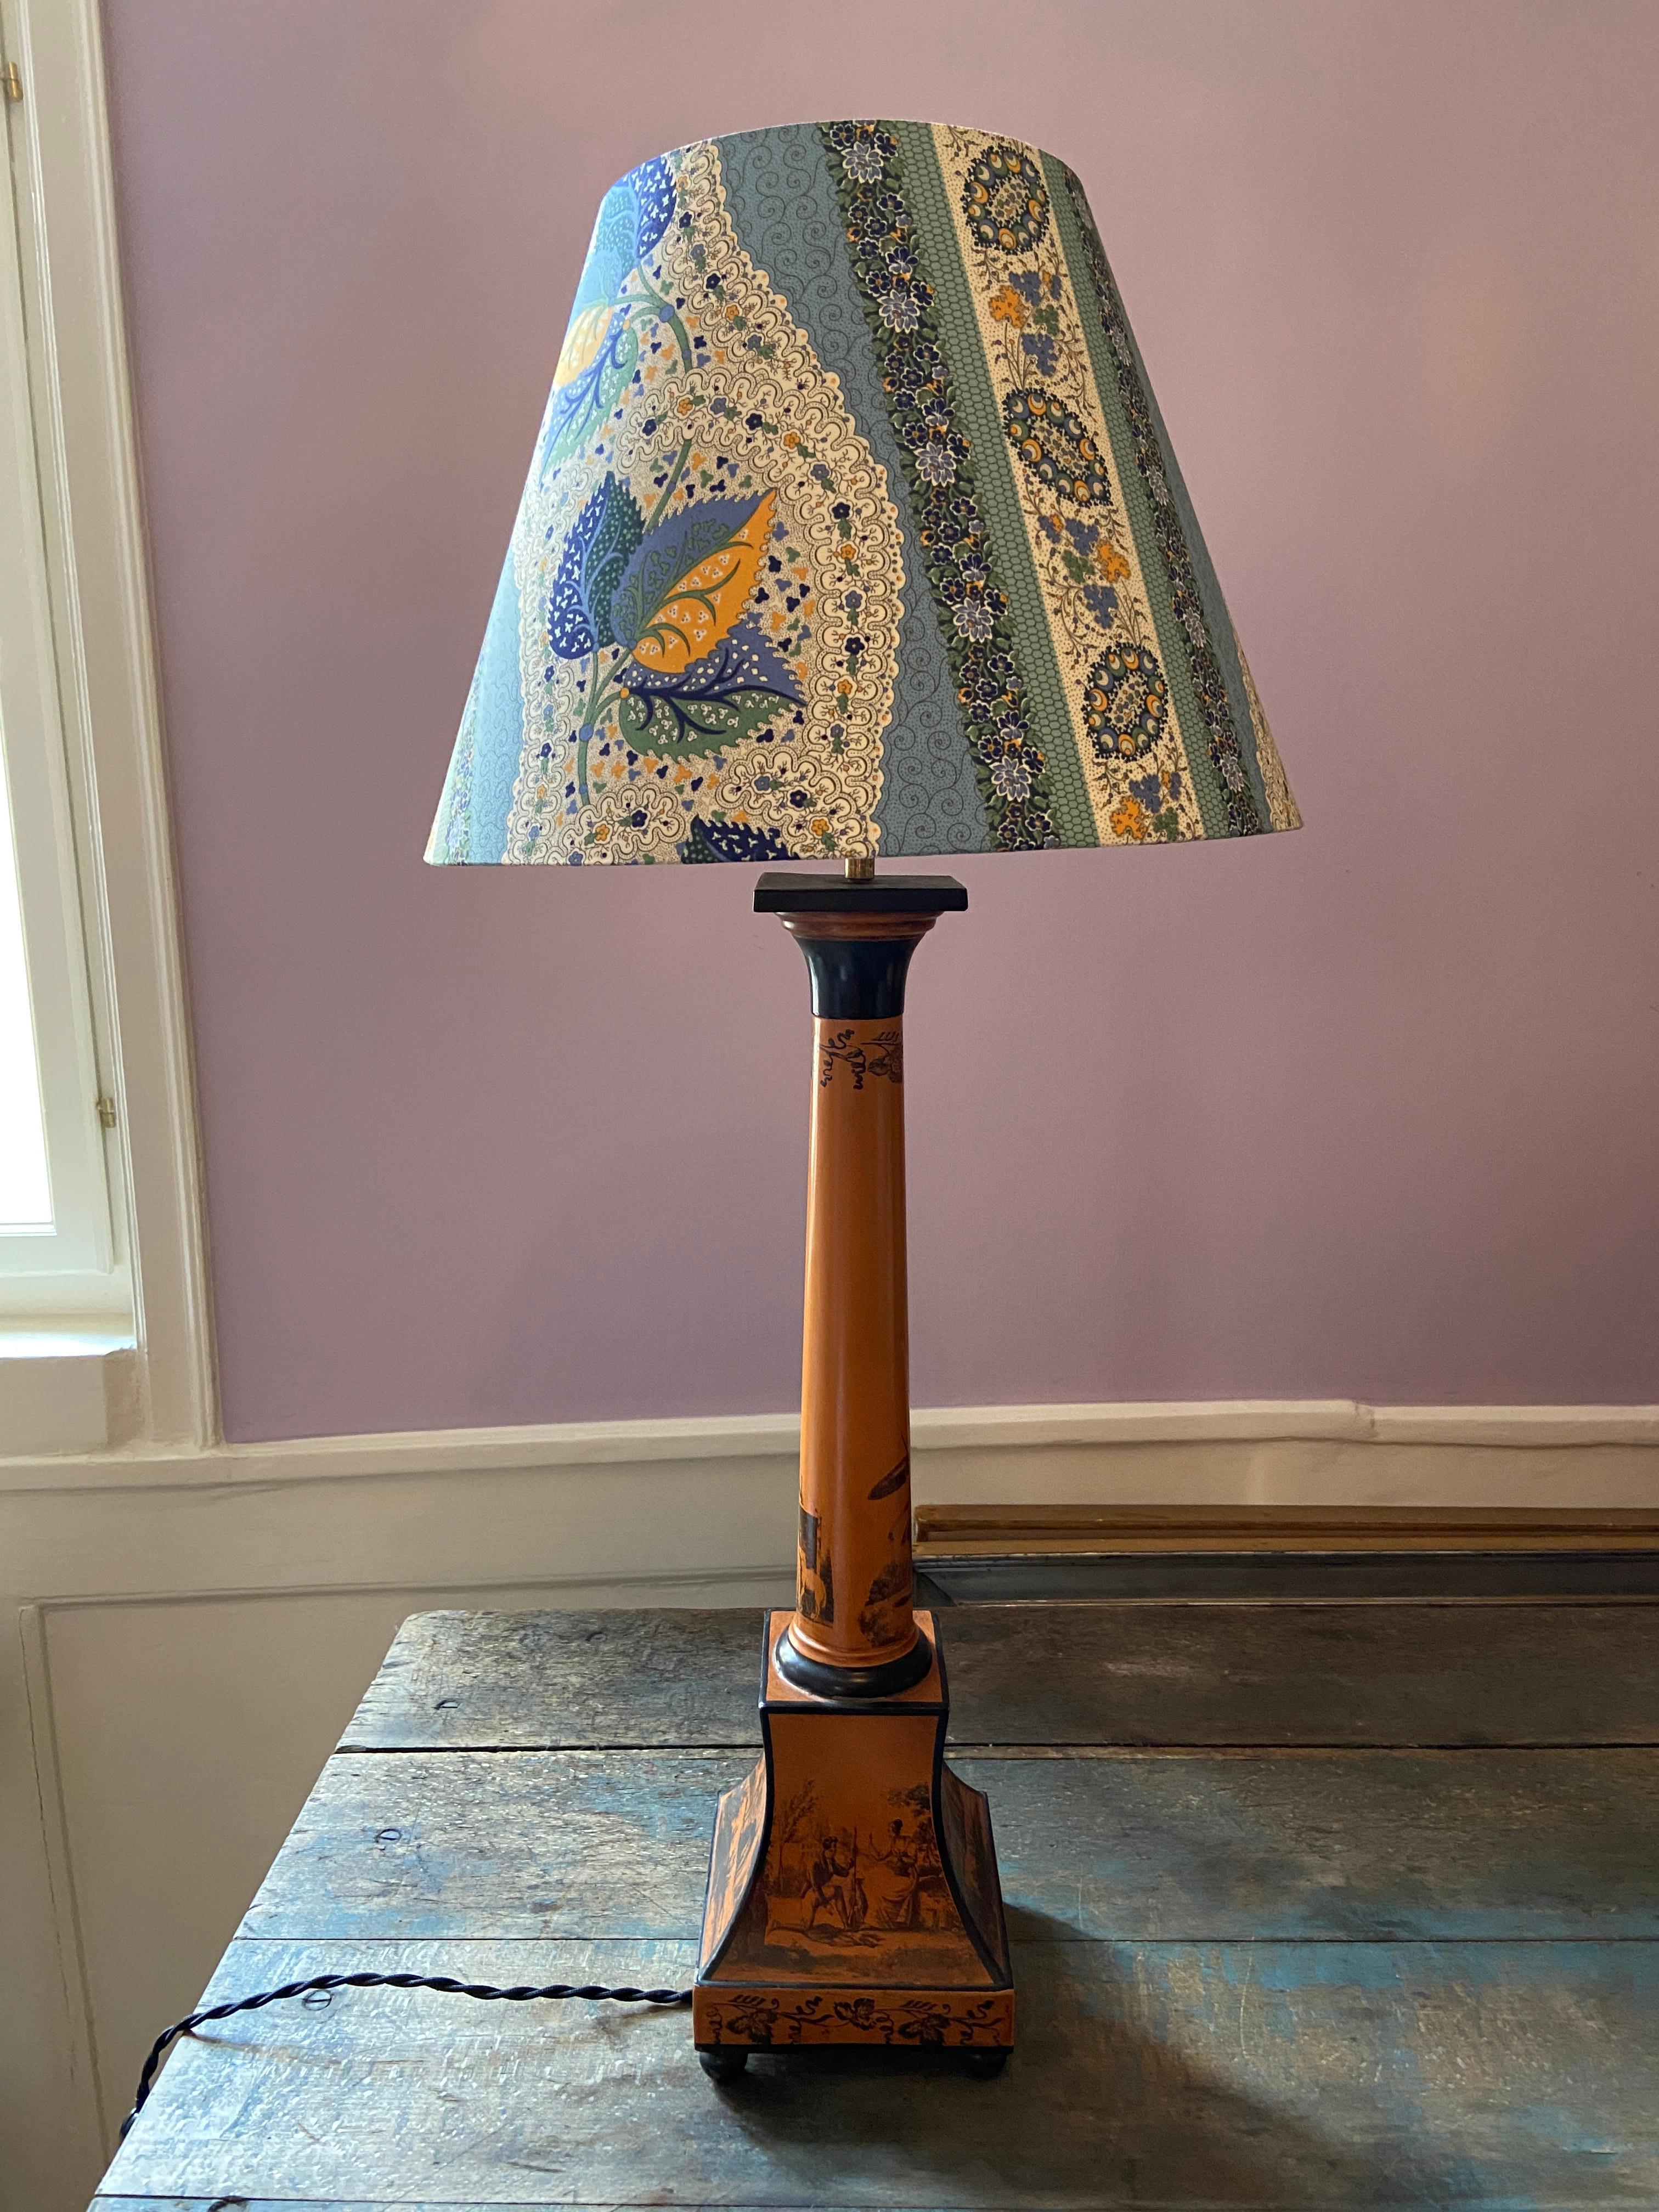 French Vintage Painted Metal Table Lamp with Customized Shade, France Late 19th-Century